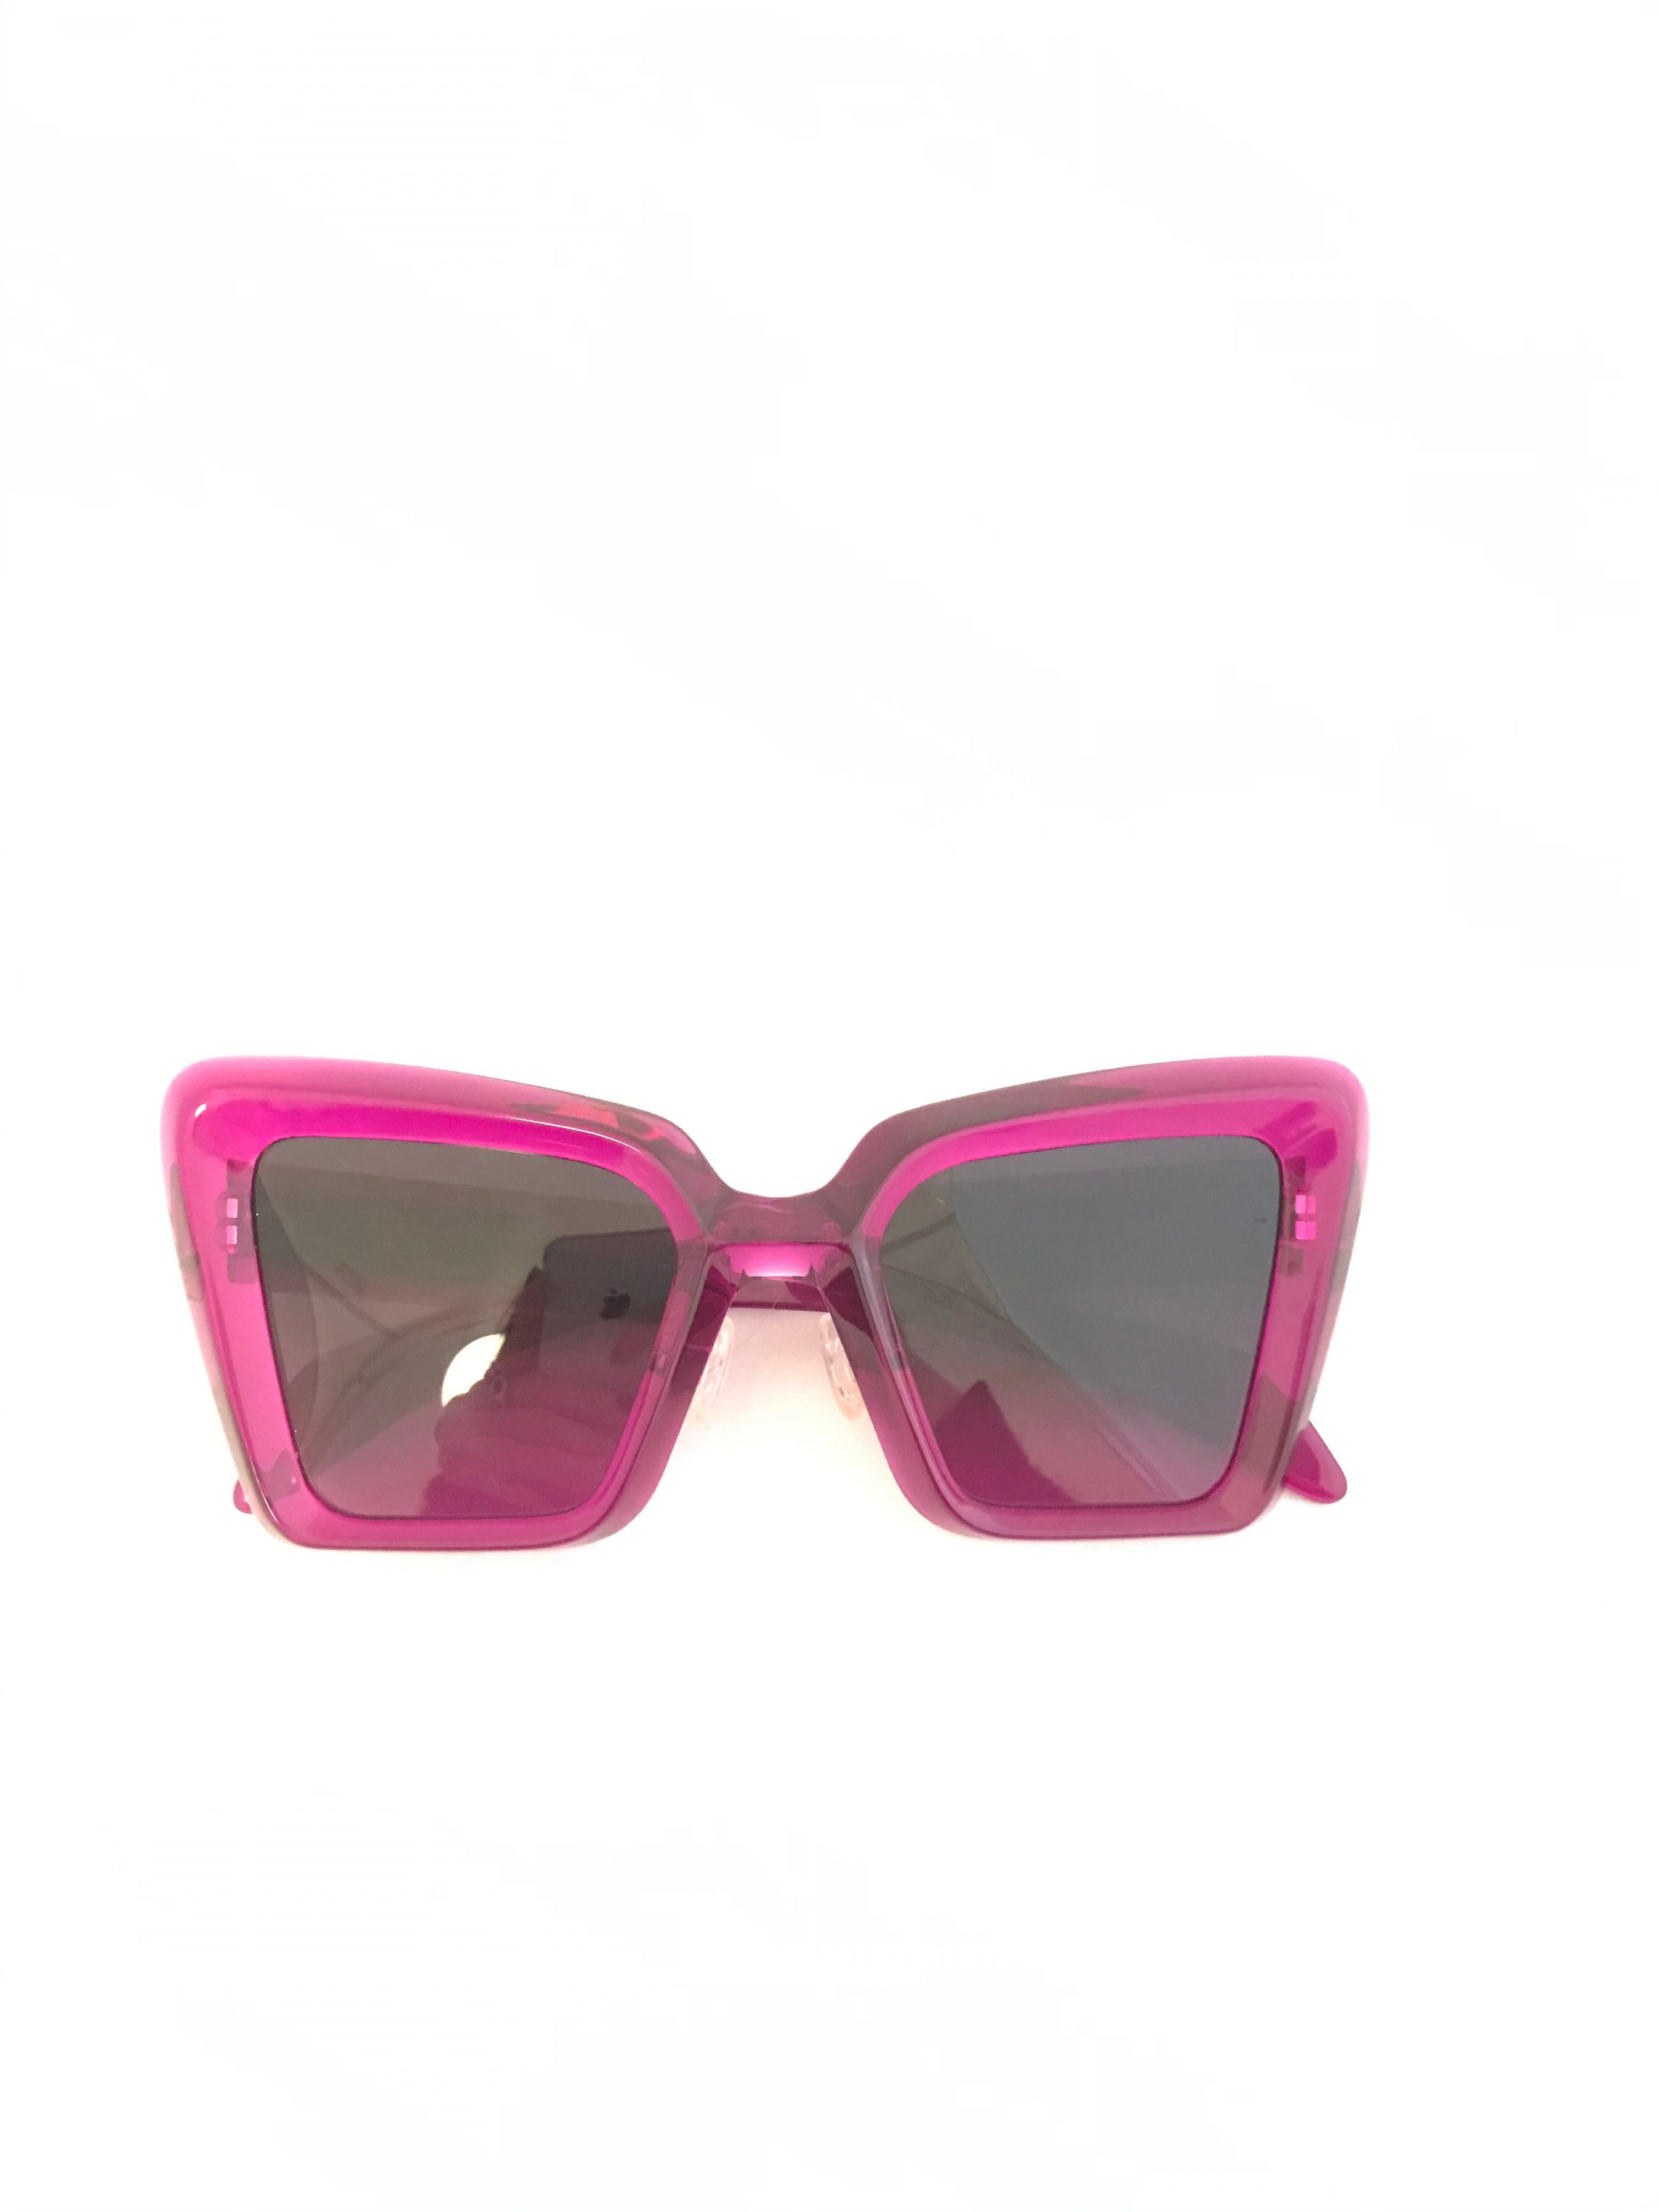 Jacques Marie Mage Limited Edition Hot Pink  'Sly' Sunglasses For Sale 4